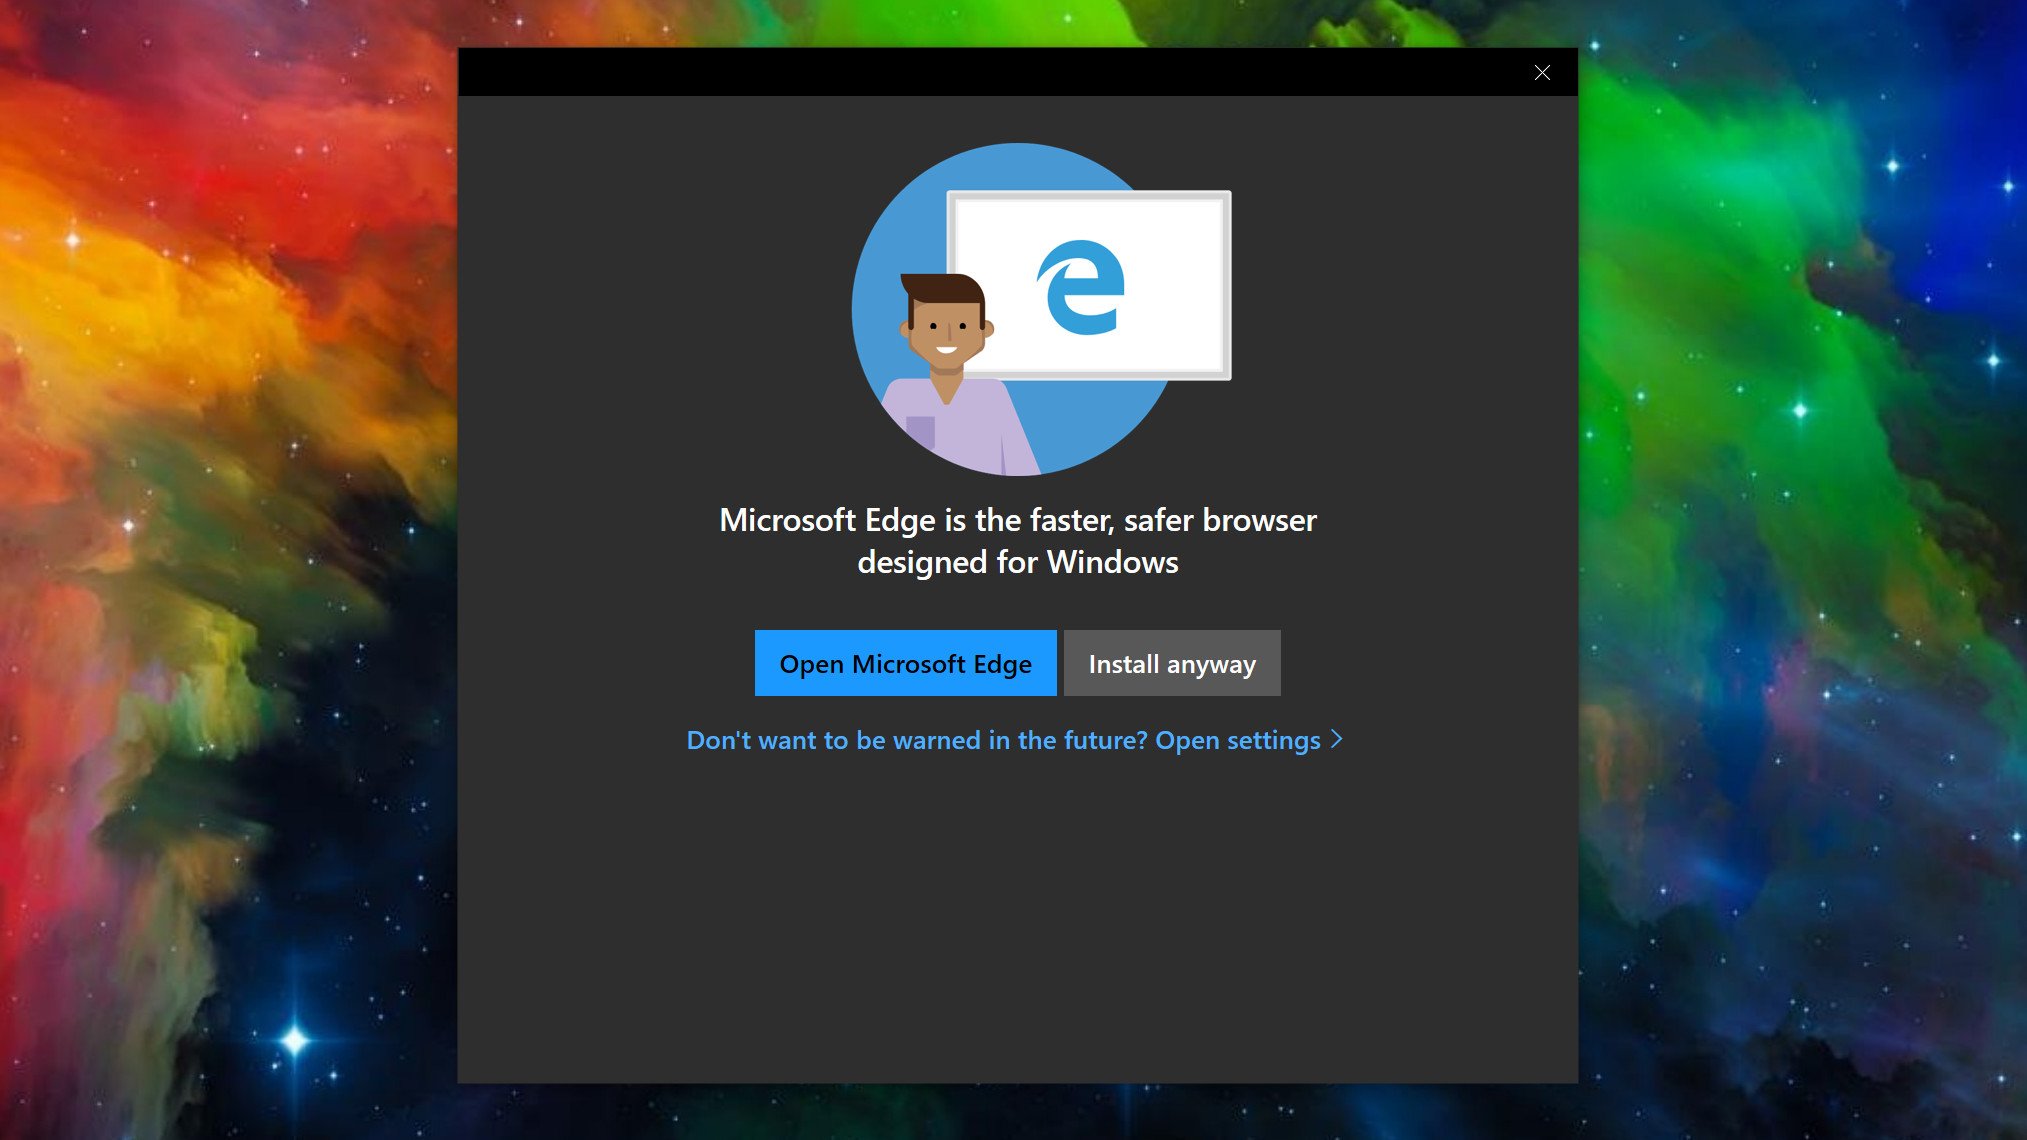 Microsoft retreats on Edge recommendation when installing Chrome and Firefox